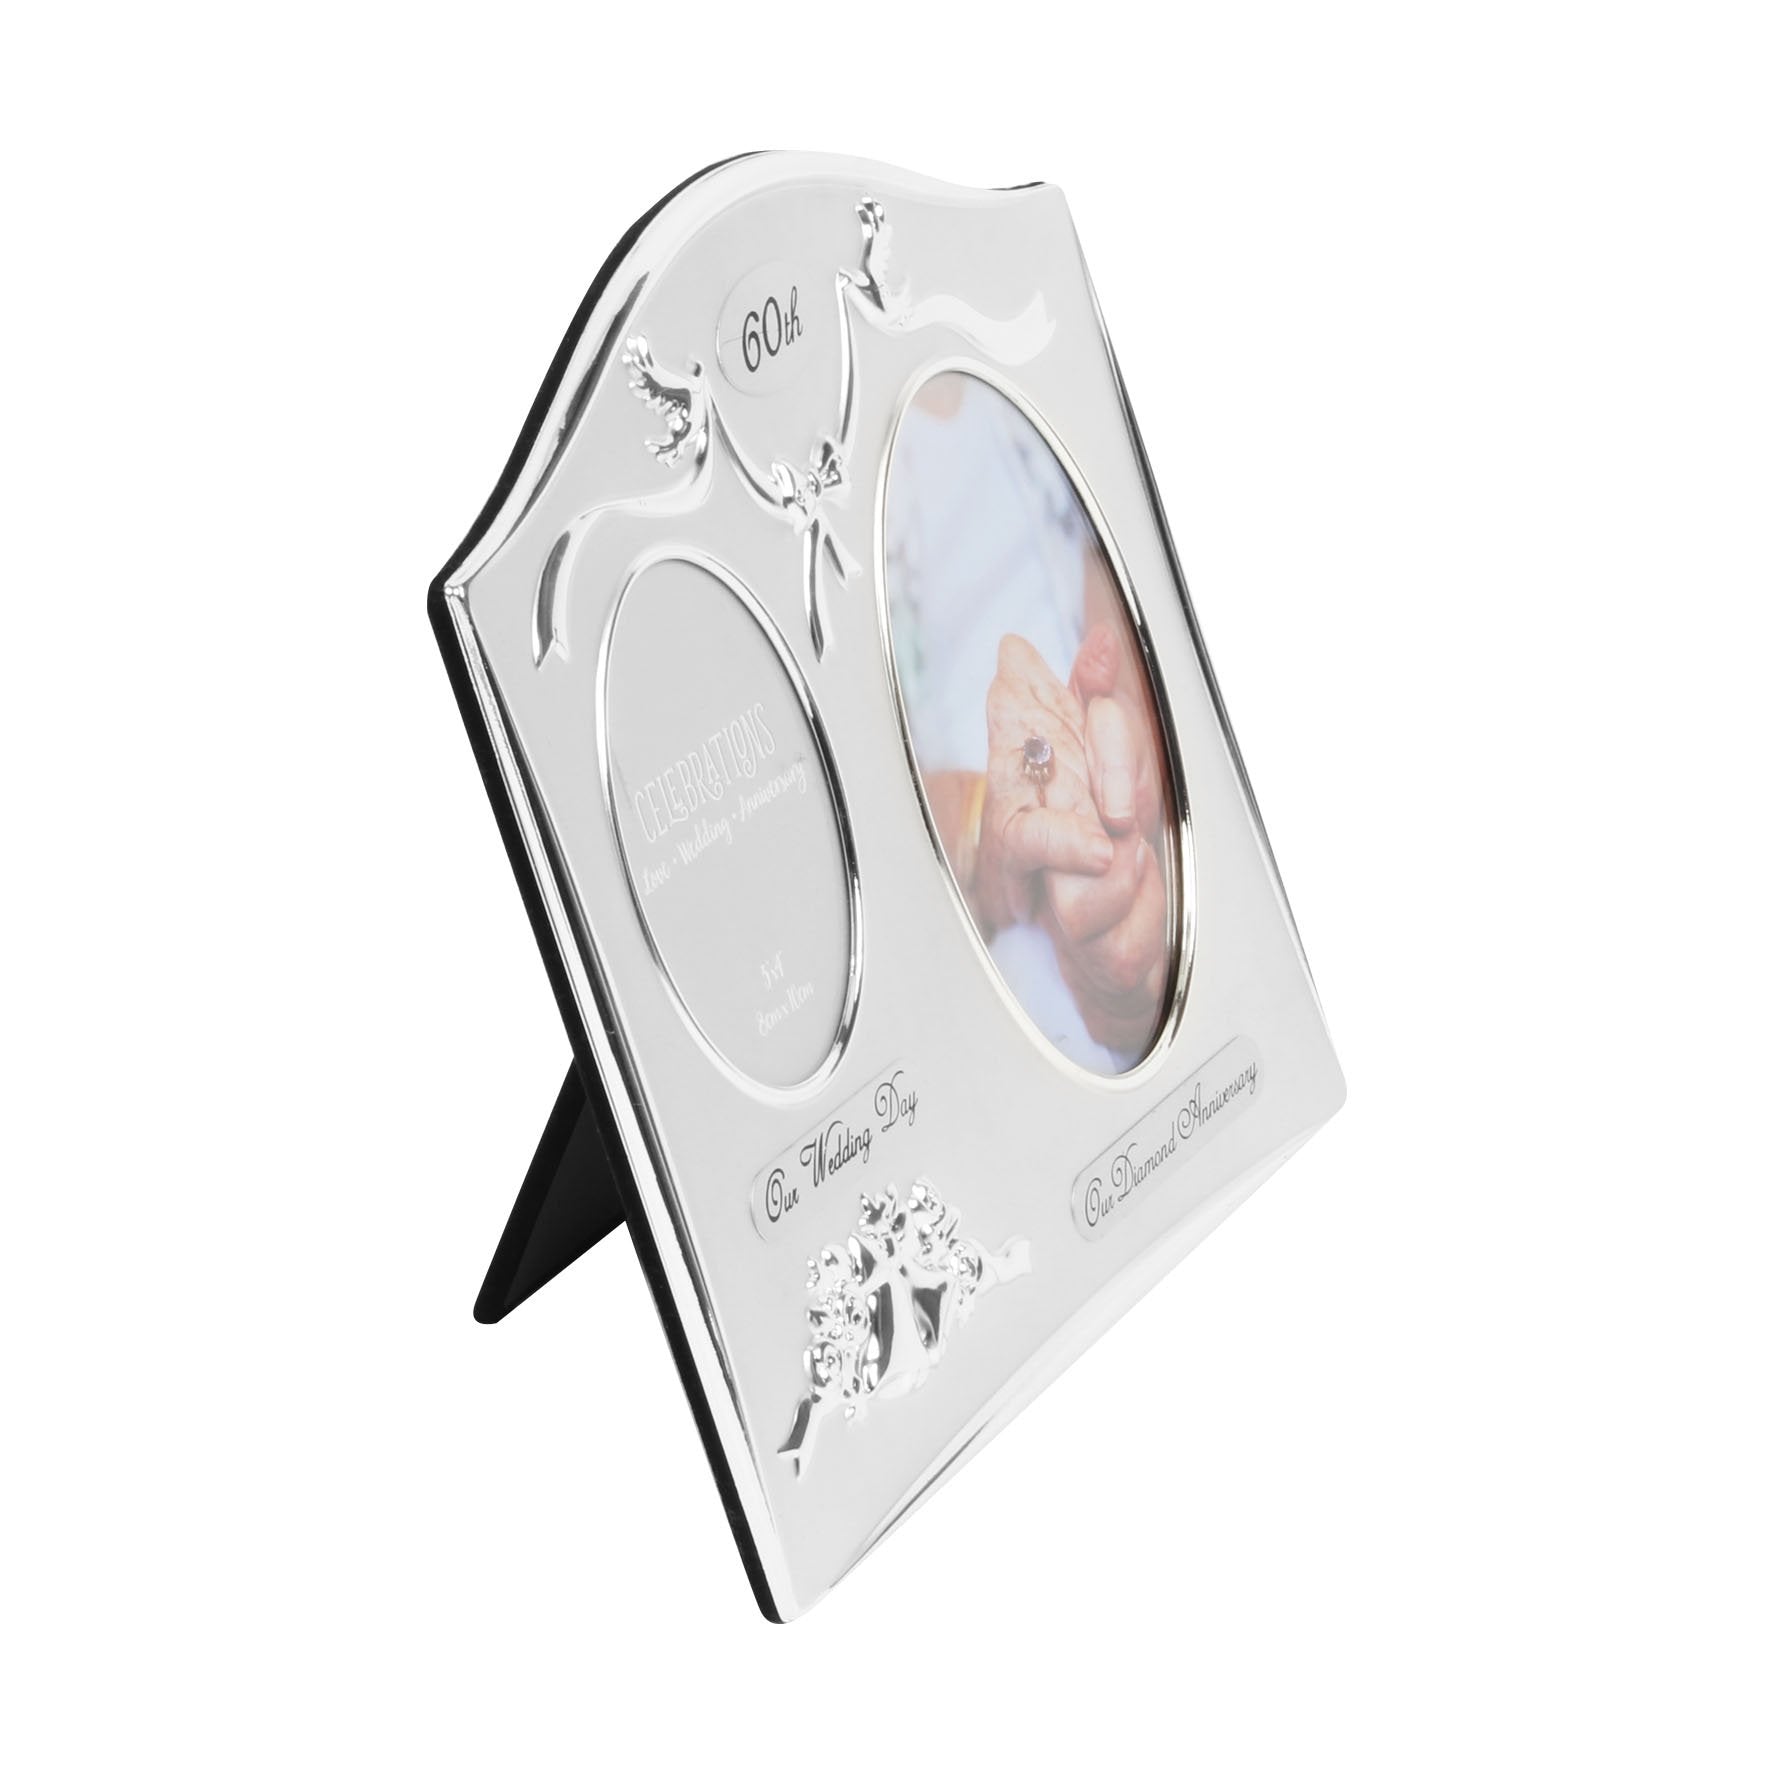 Two Tone Silverplated 60Th Diamond Wedding Anniversary Double Photo Frame Gifts Toys & Games